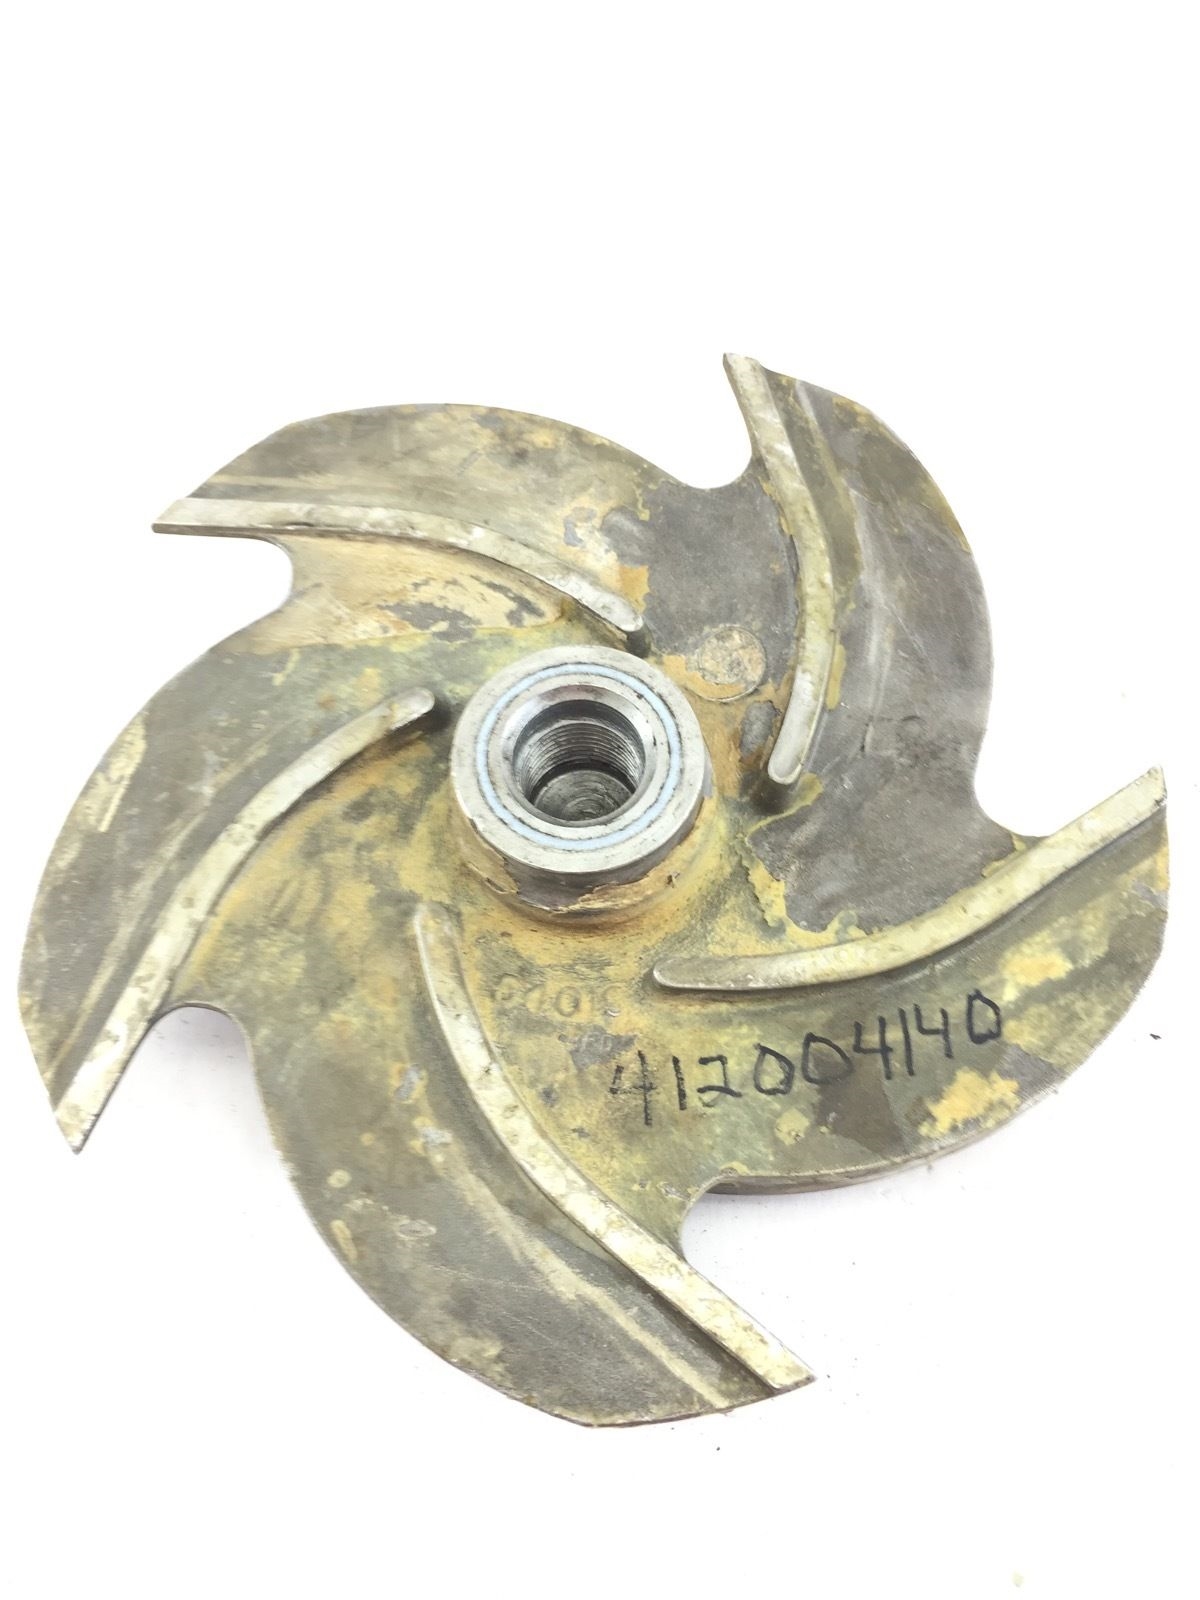 GOULDS 1203 100 595 PUMP IMPELLER USED IN GOOD SHAPE (B69) 2